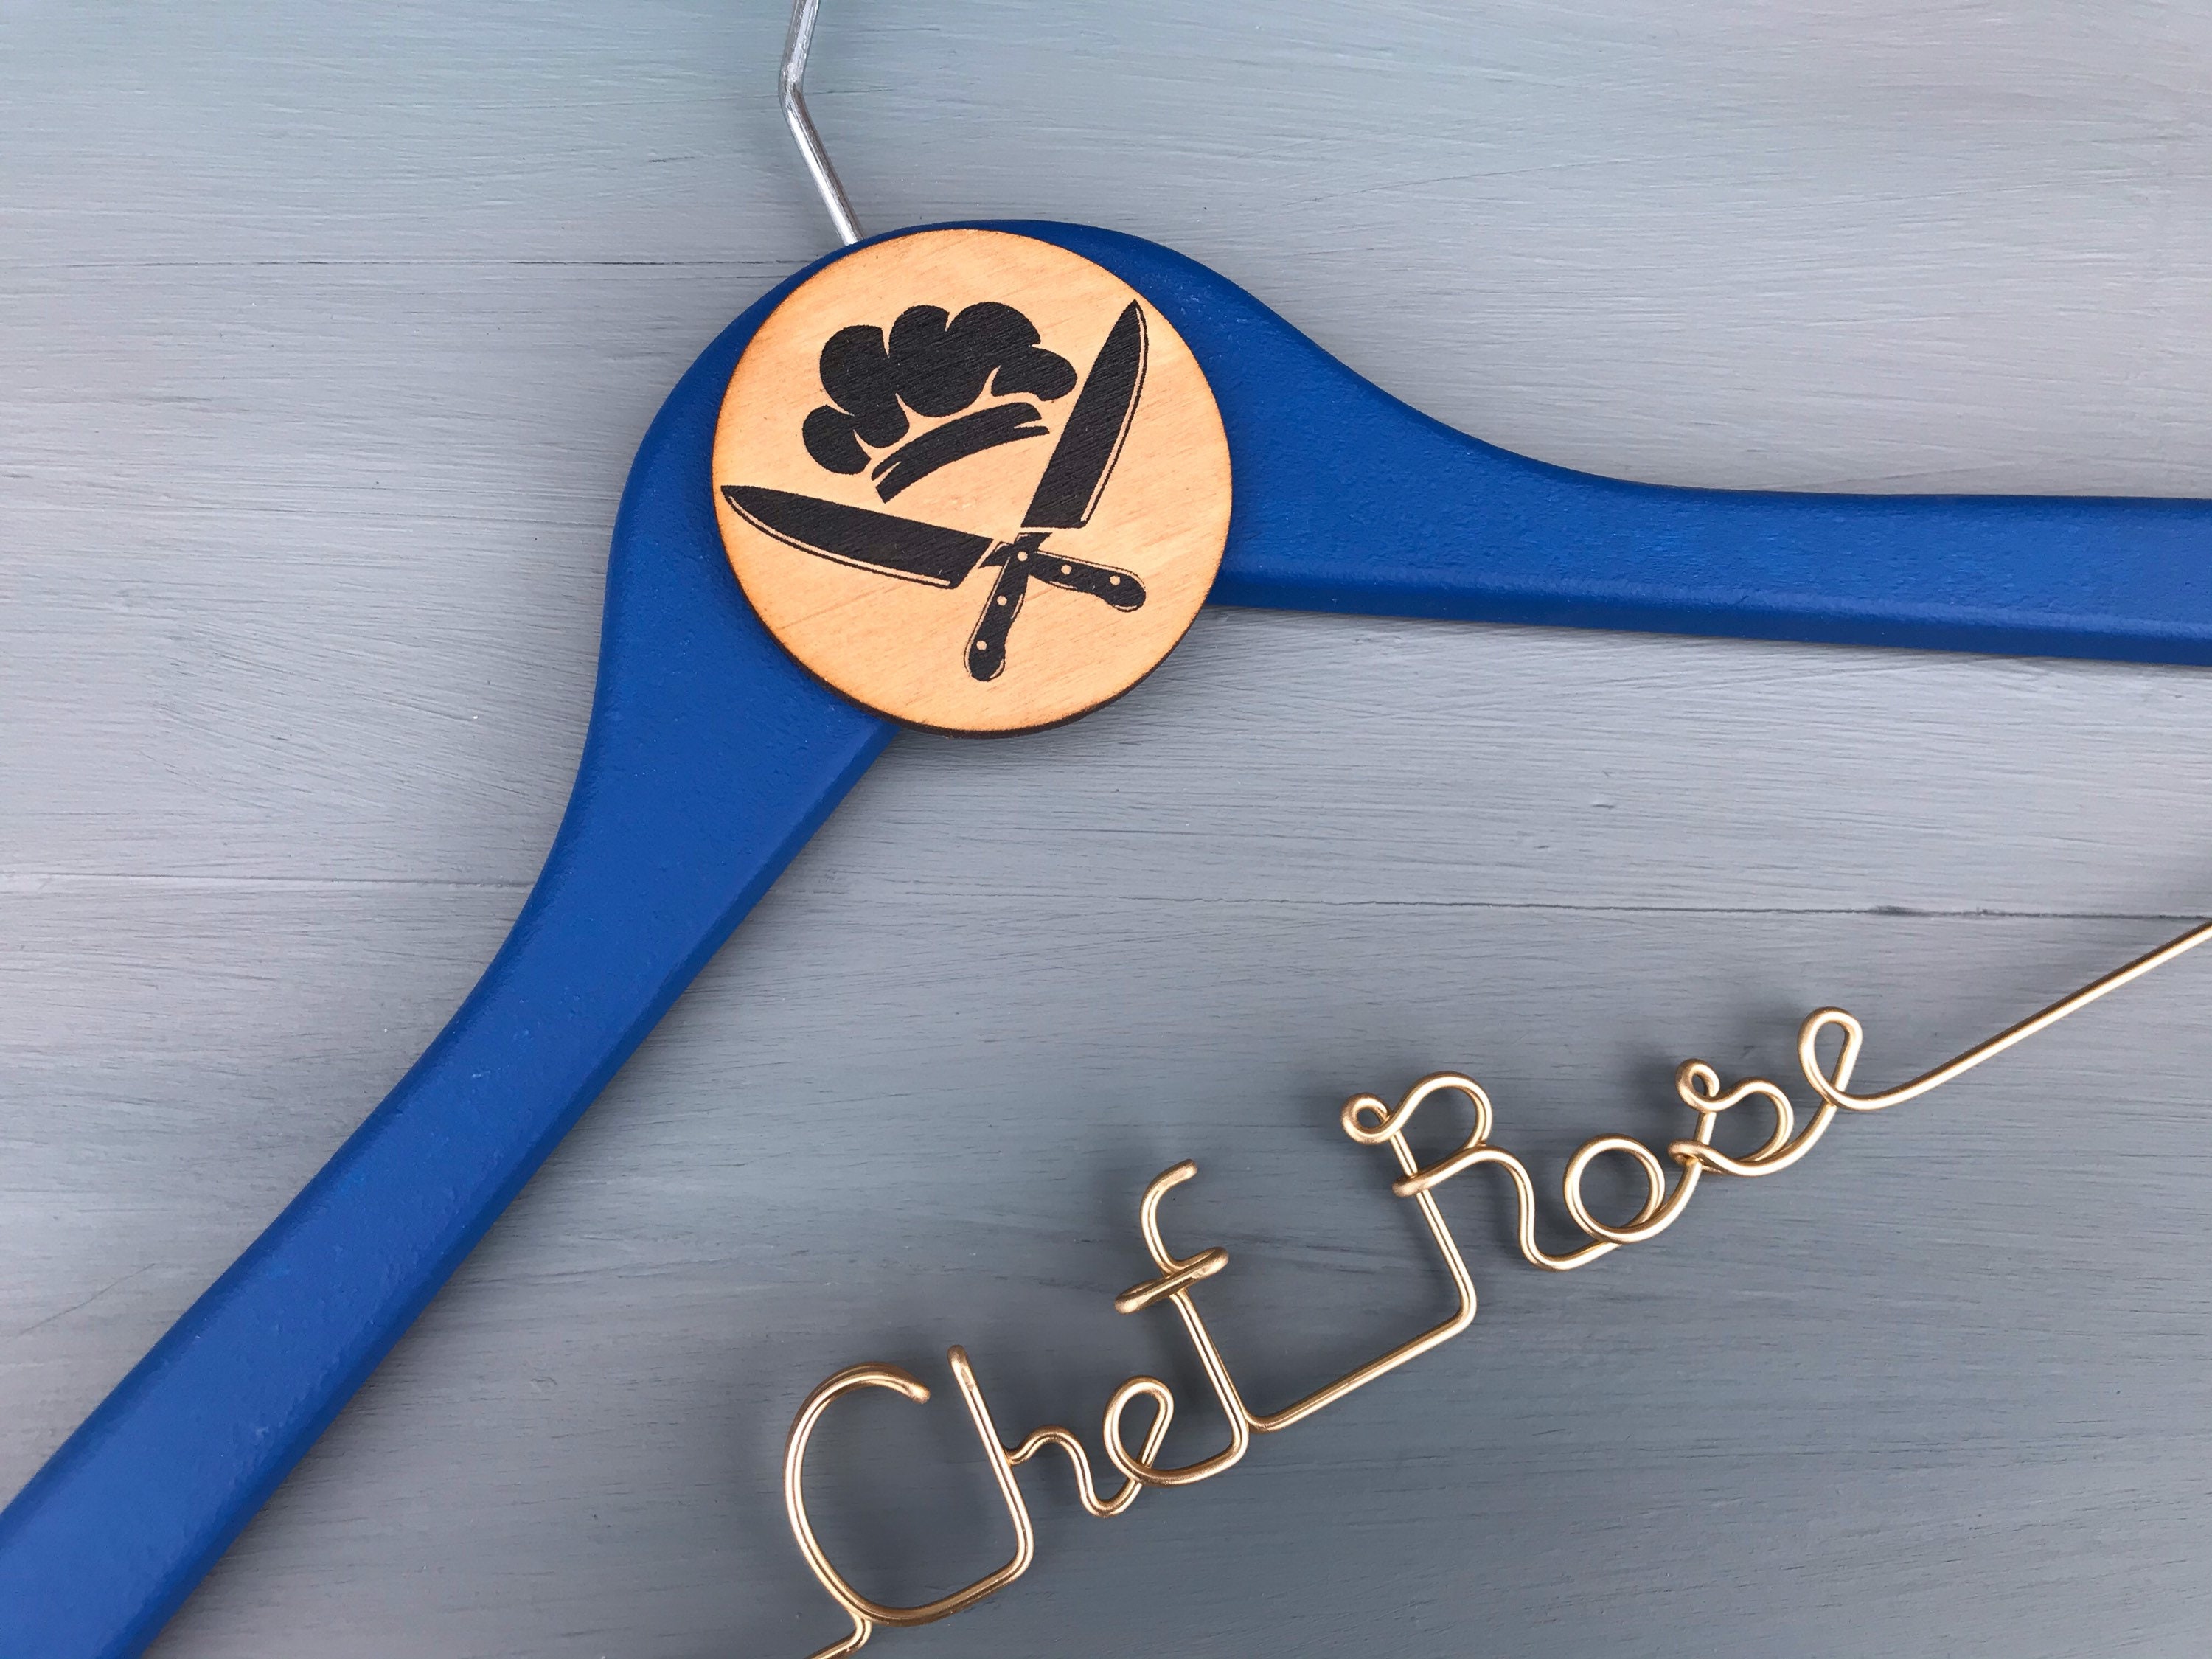 Chef Gift, Culinary Gifts, Personalized Chef Coat Hanger, Culinary  Graduation Gift, Unique Gift for Chef, Foodie Gift, Cooking Gifts 